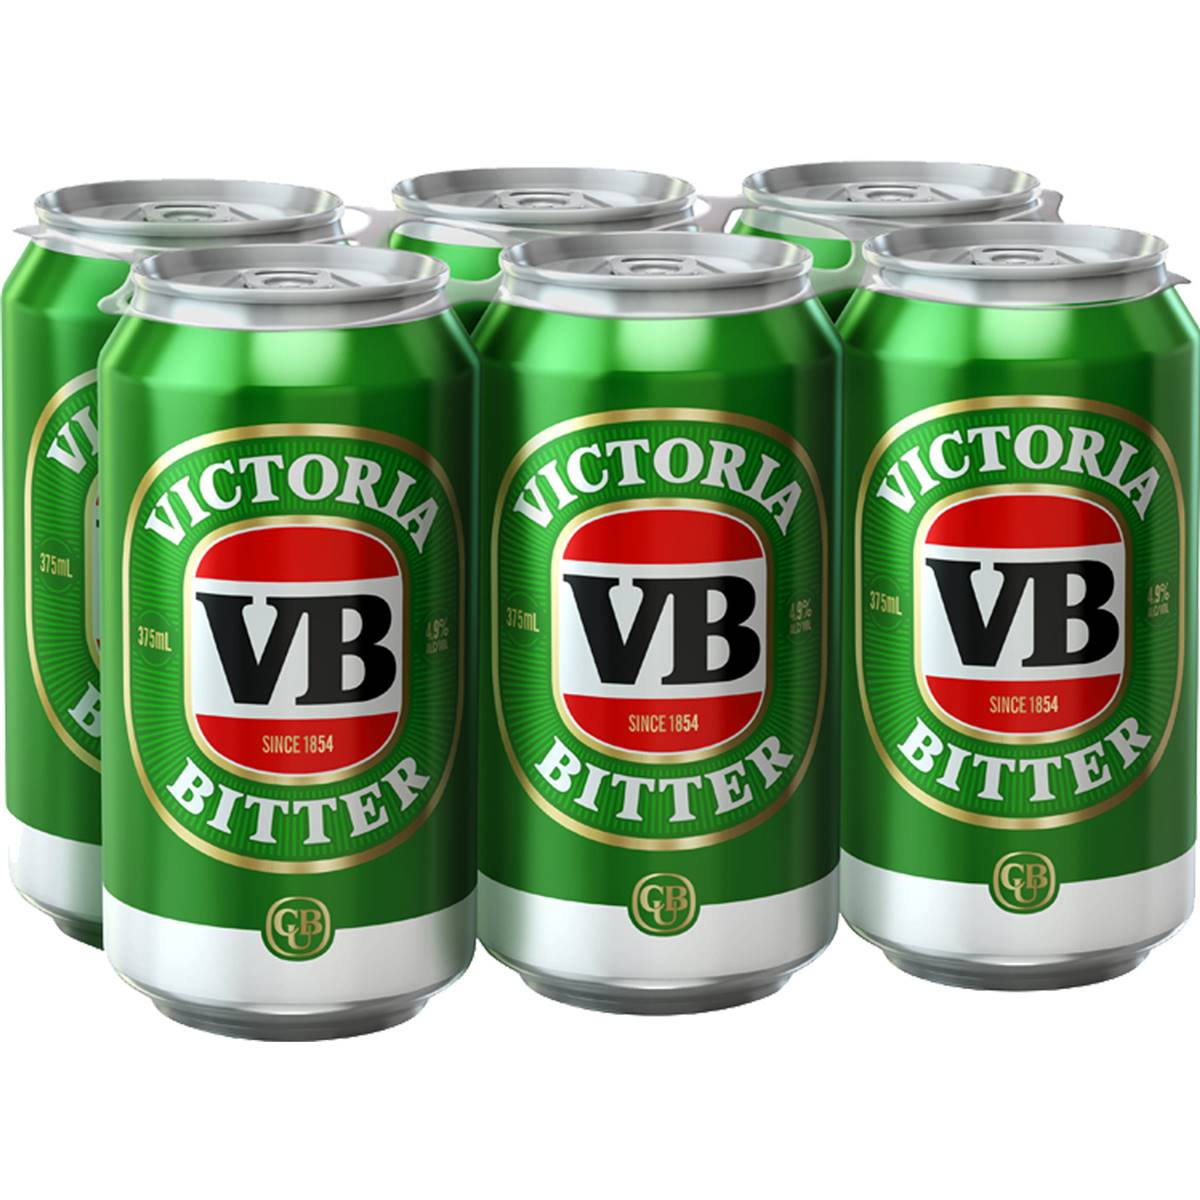 Victoria Bitter Lager Cans